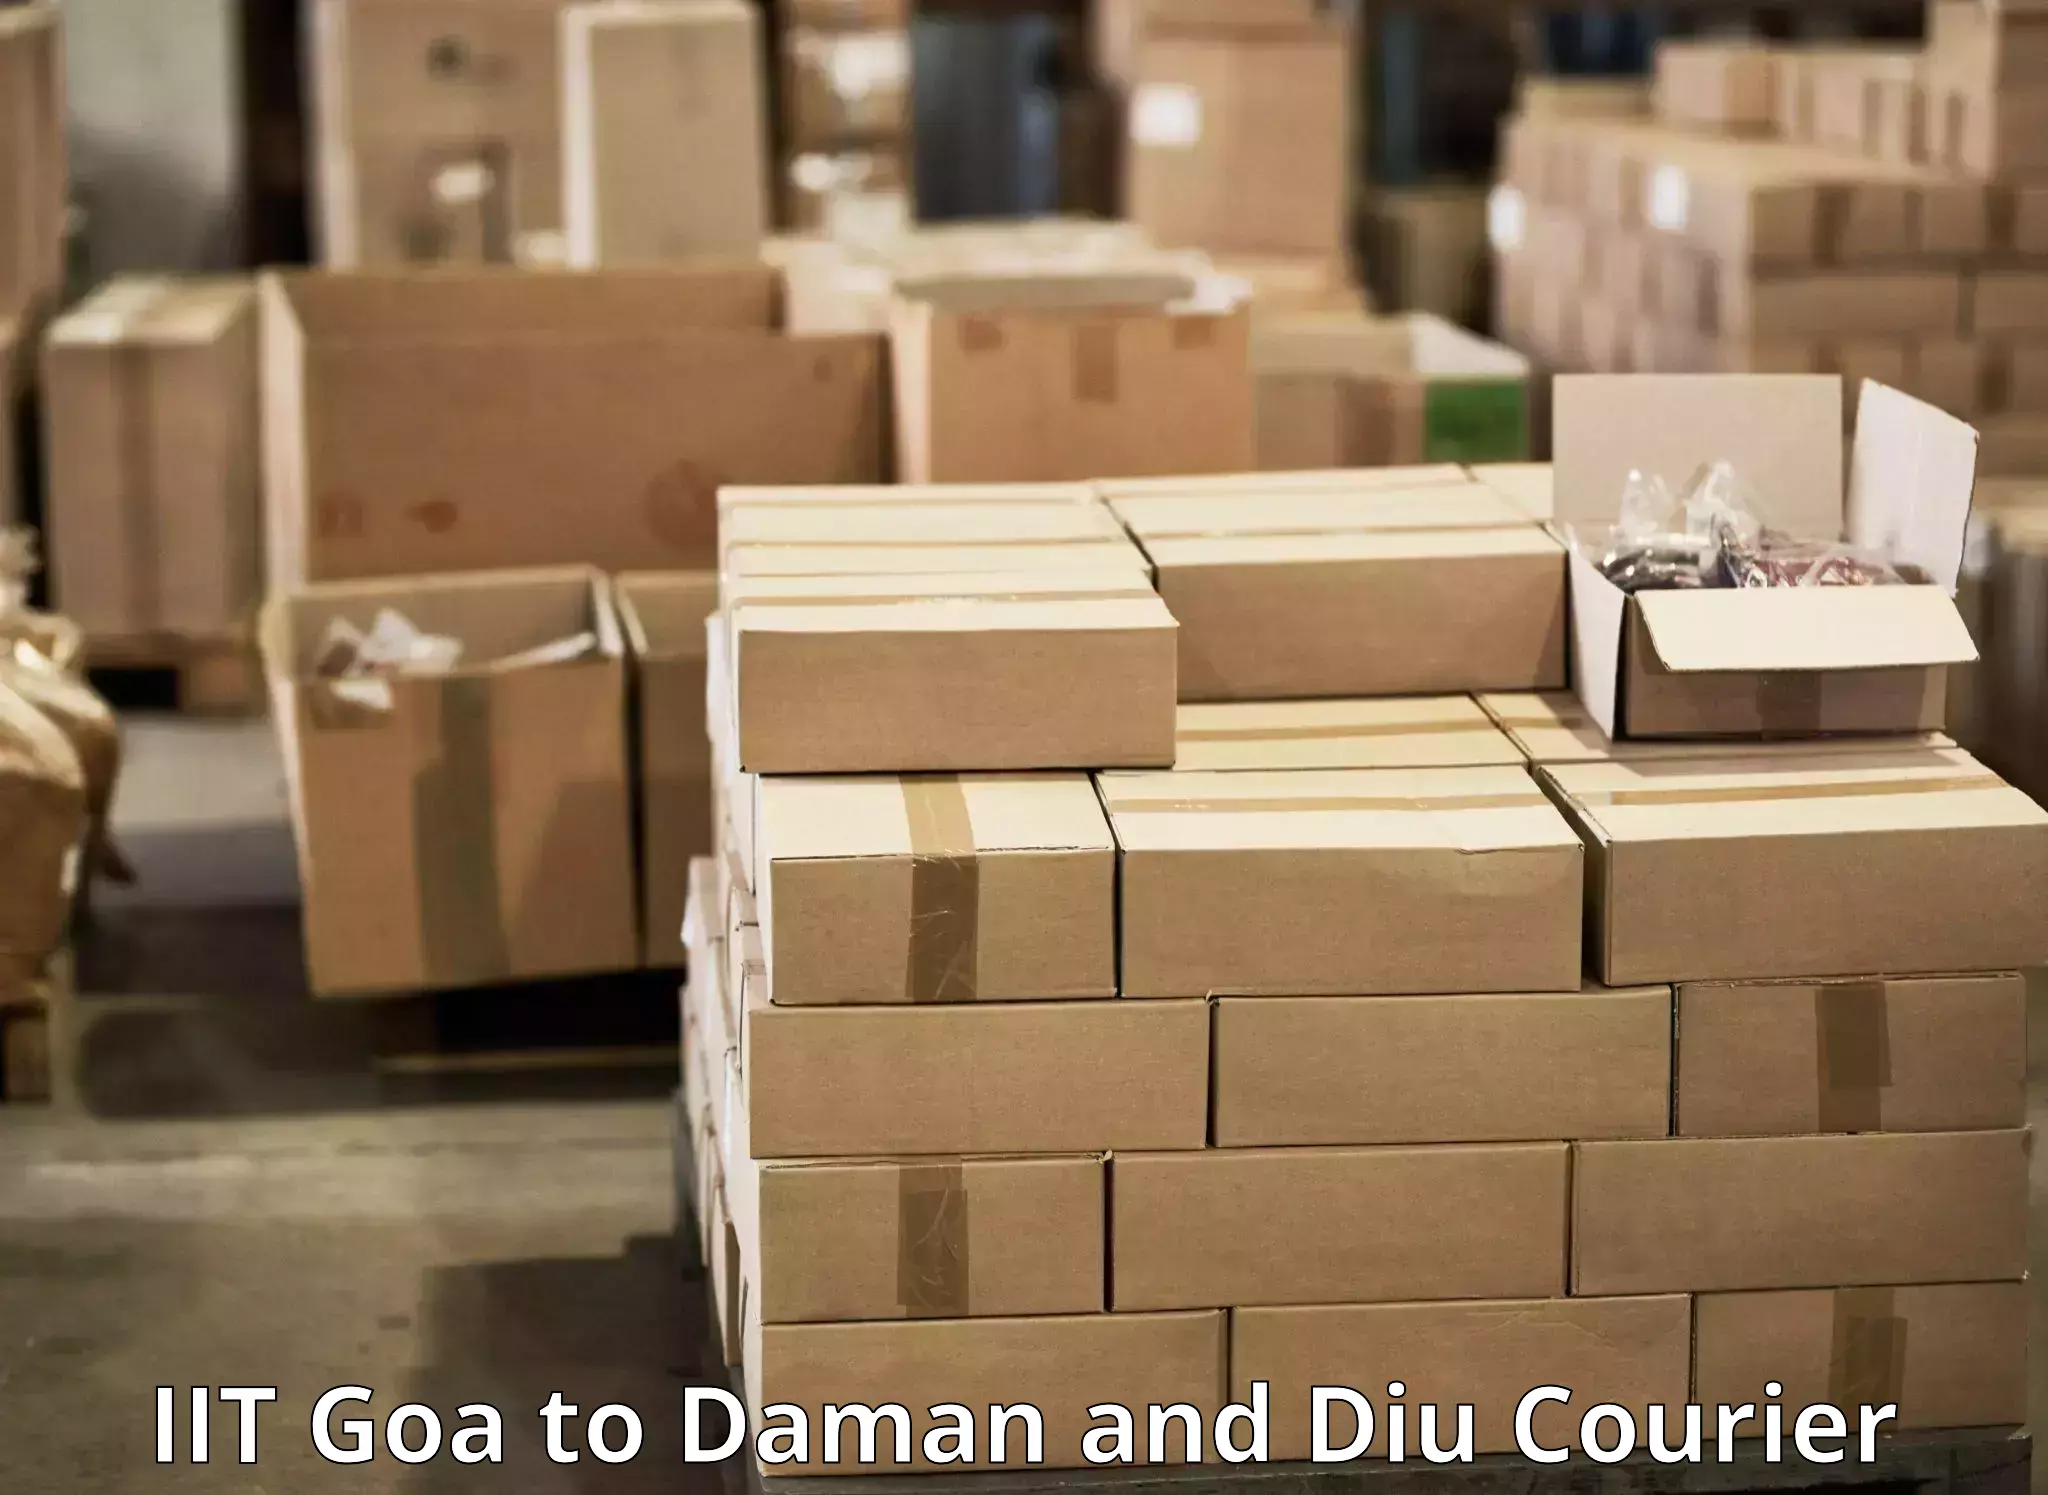 24-hour courier service IIT Goa to Daman and Diu